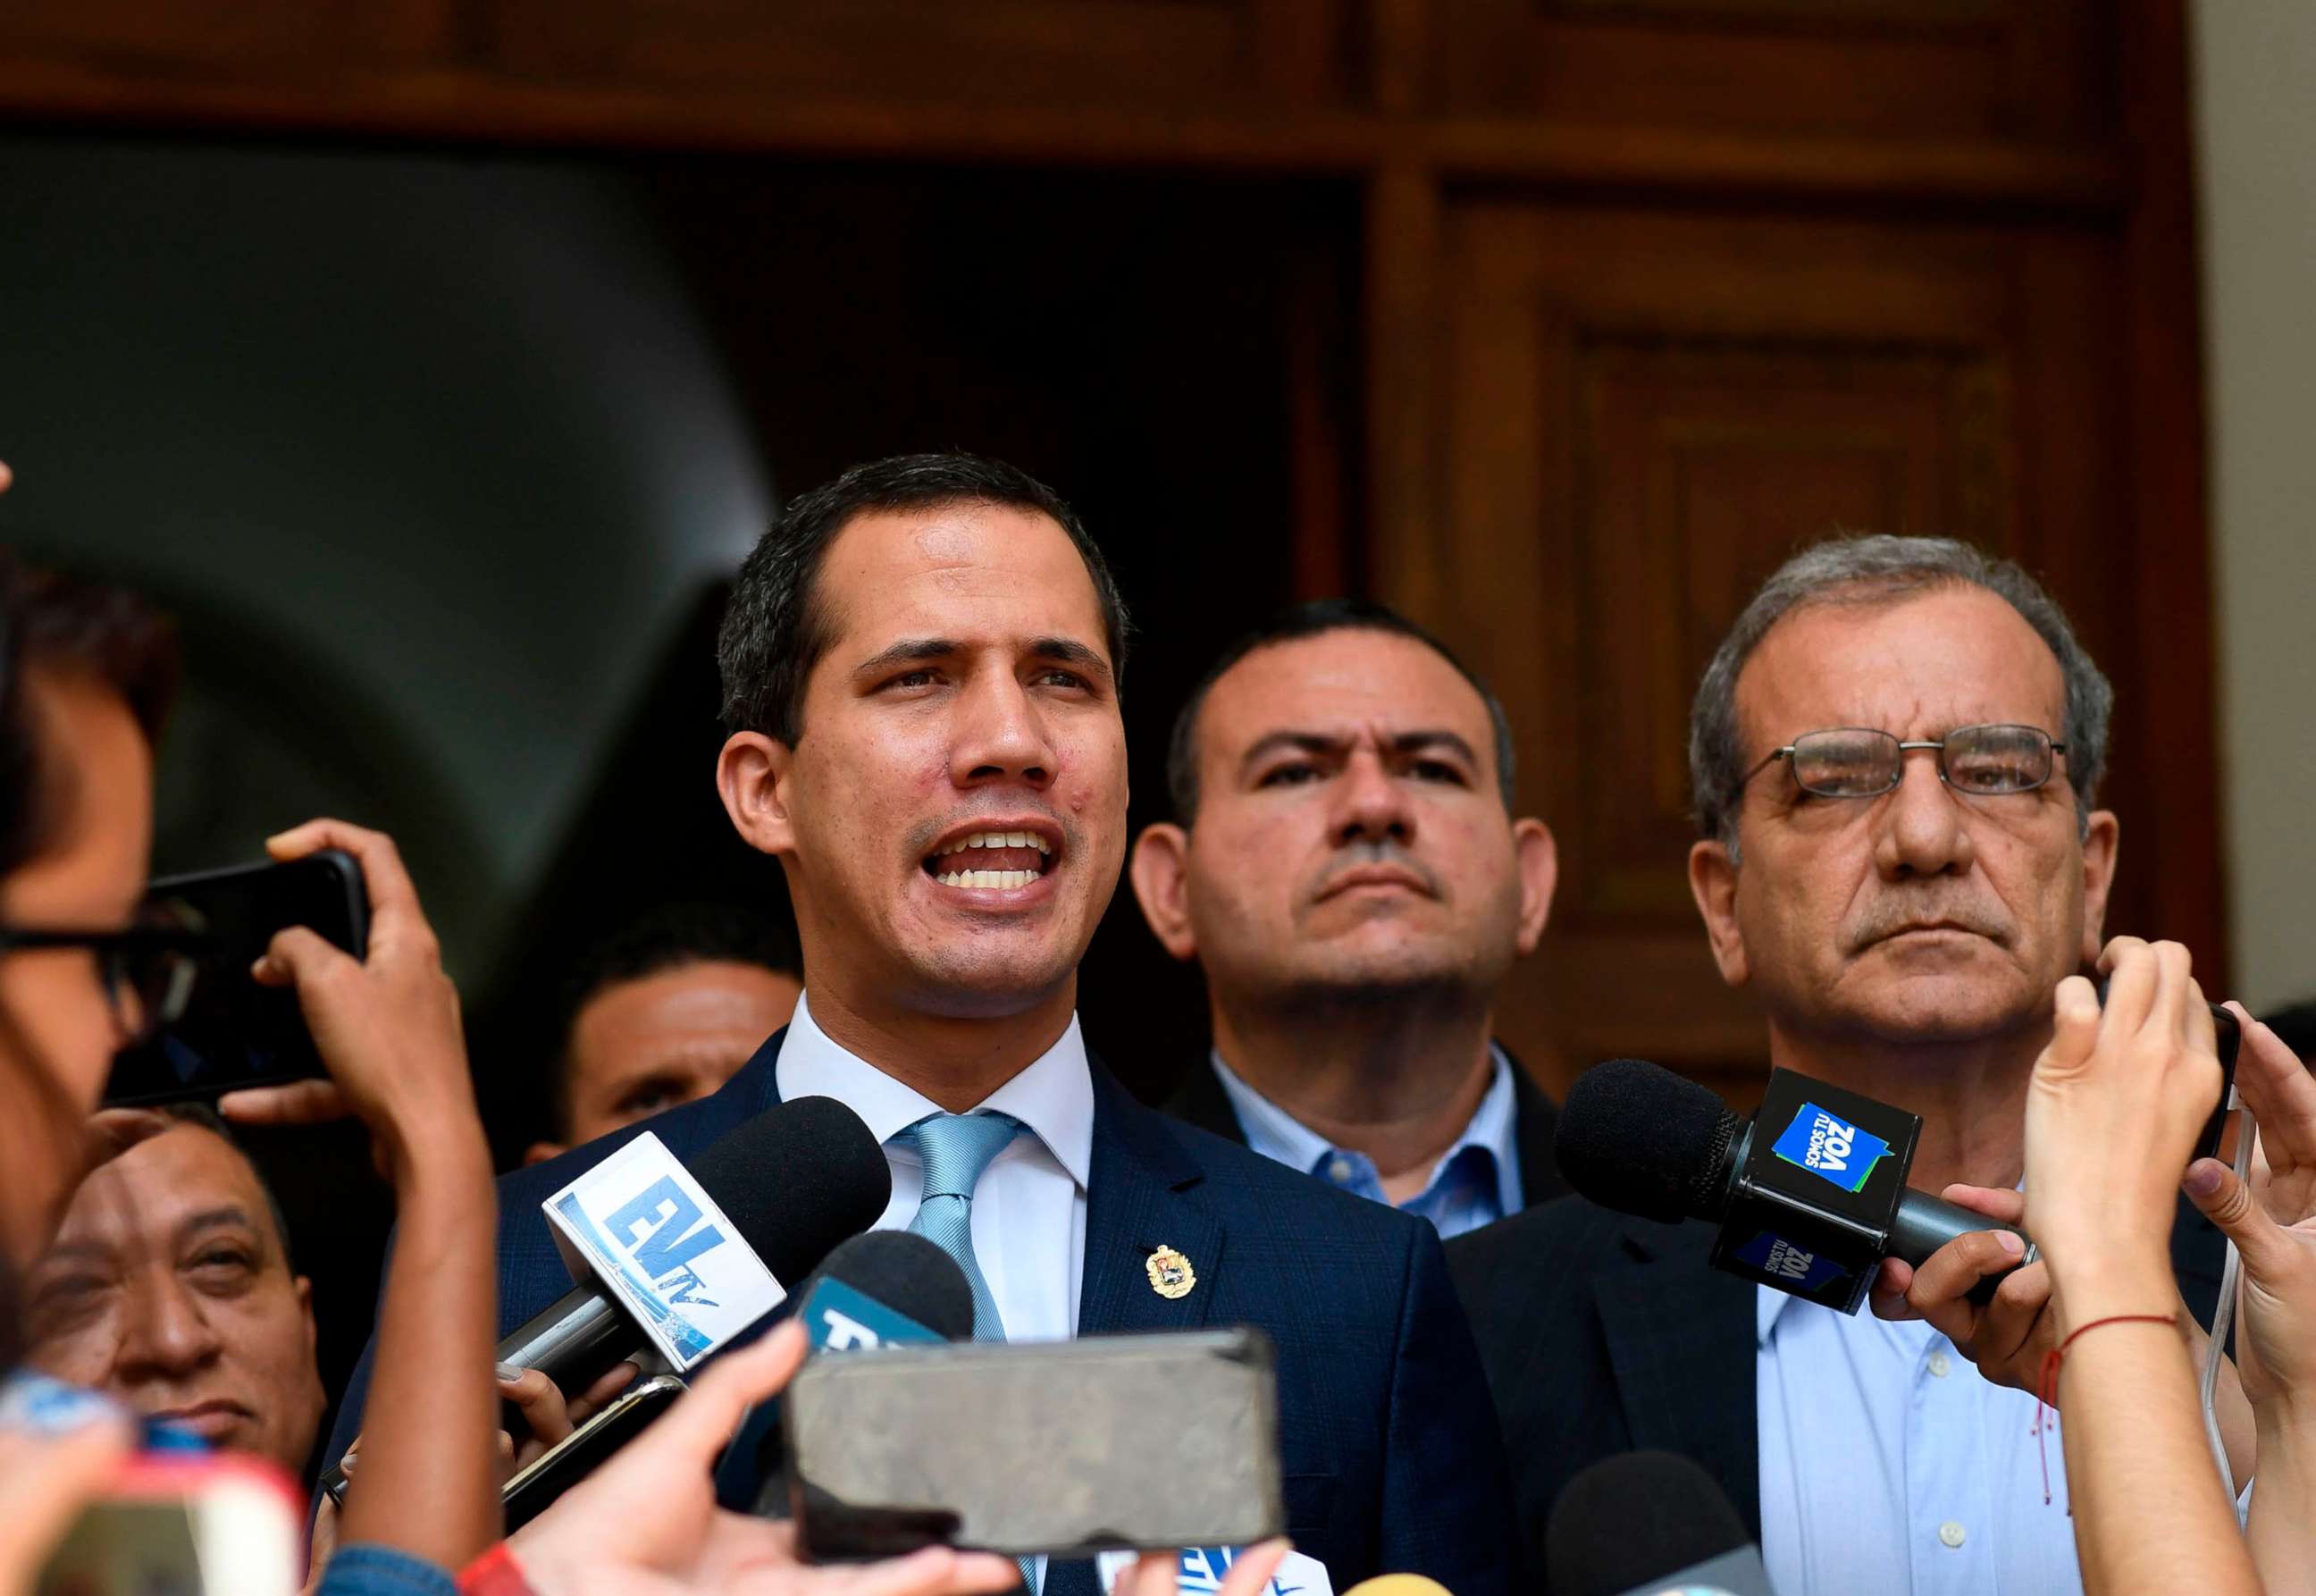 PHOTO: Venezuelan opposition leader and self-proclaimed acting president Juan Guaido (L) speaks to the press before a session at the National Assembly in Caracas on August 6, 2019.